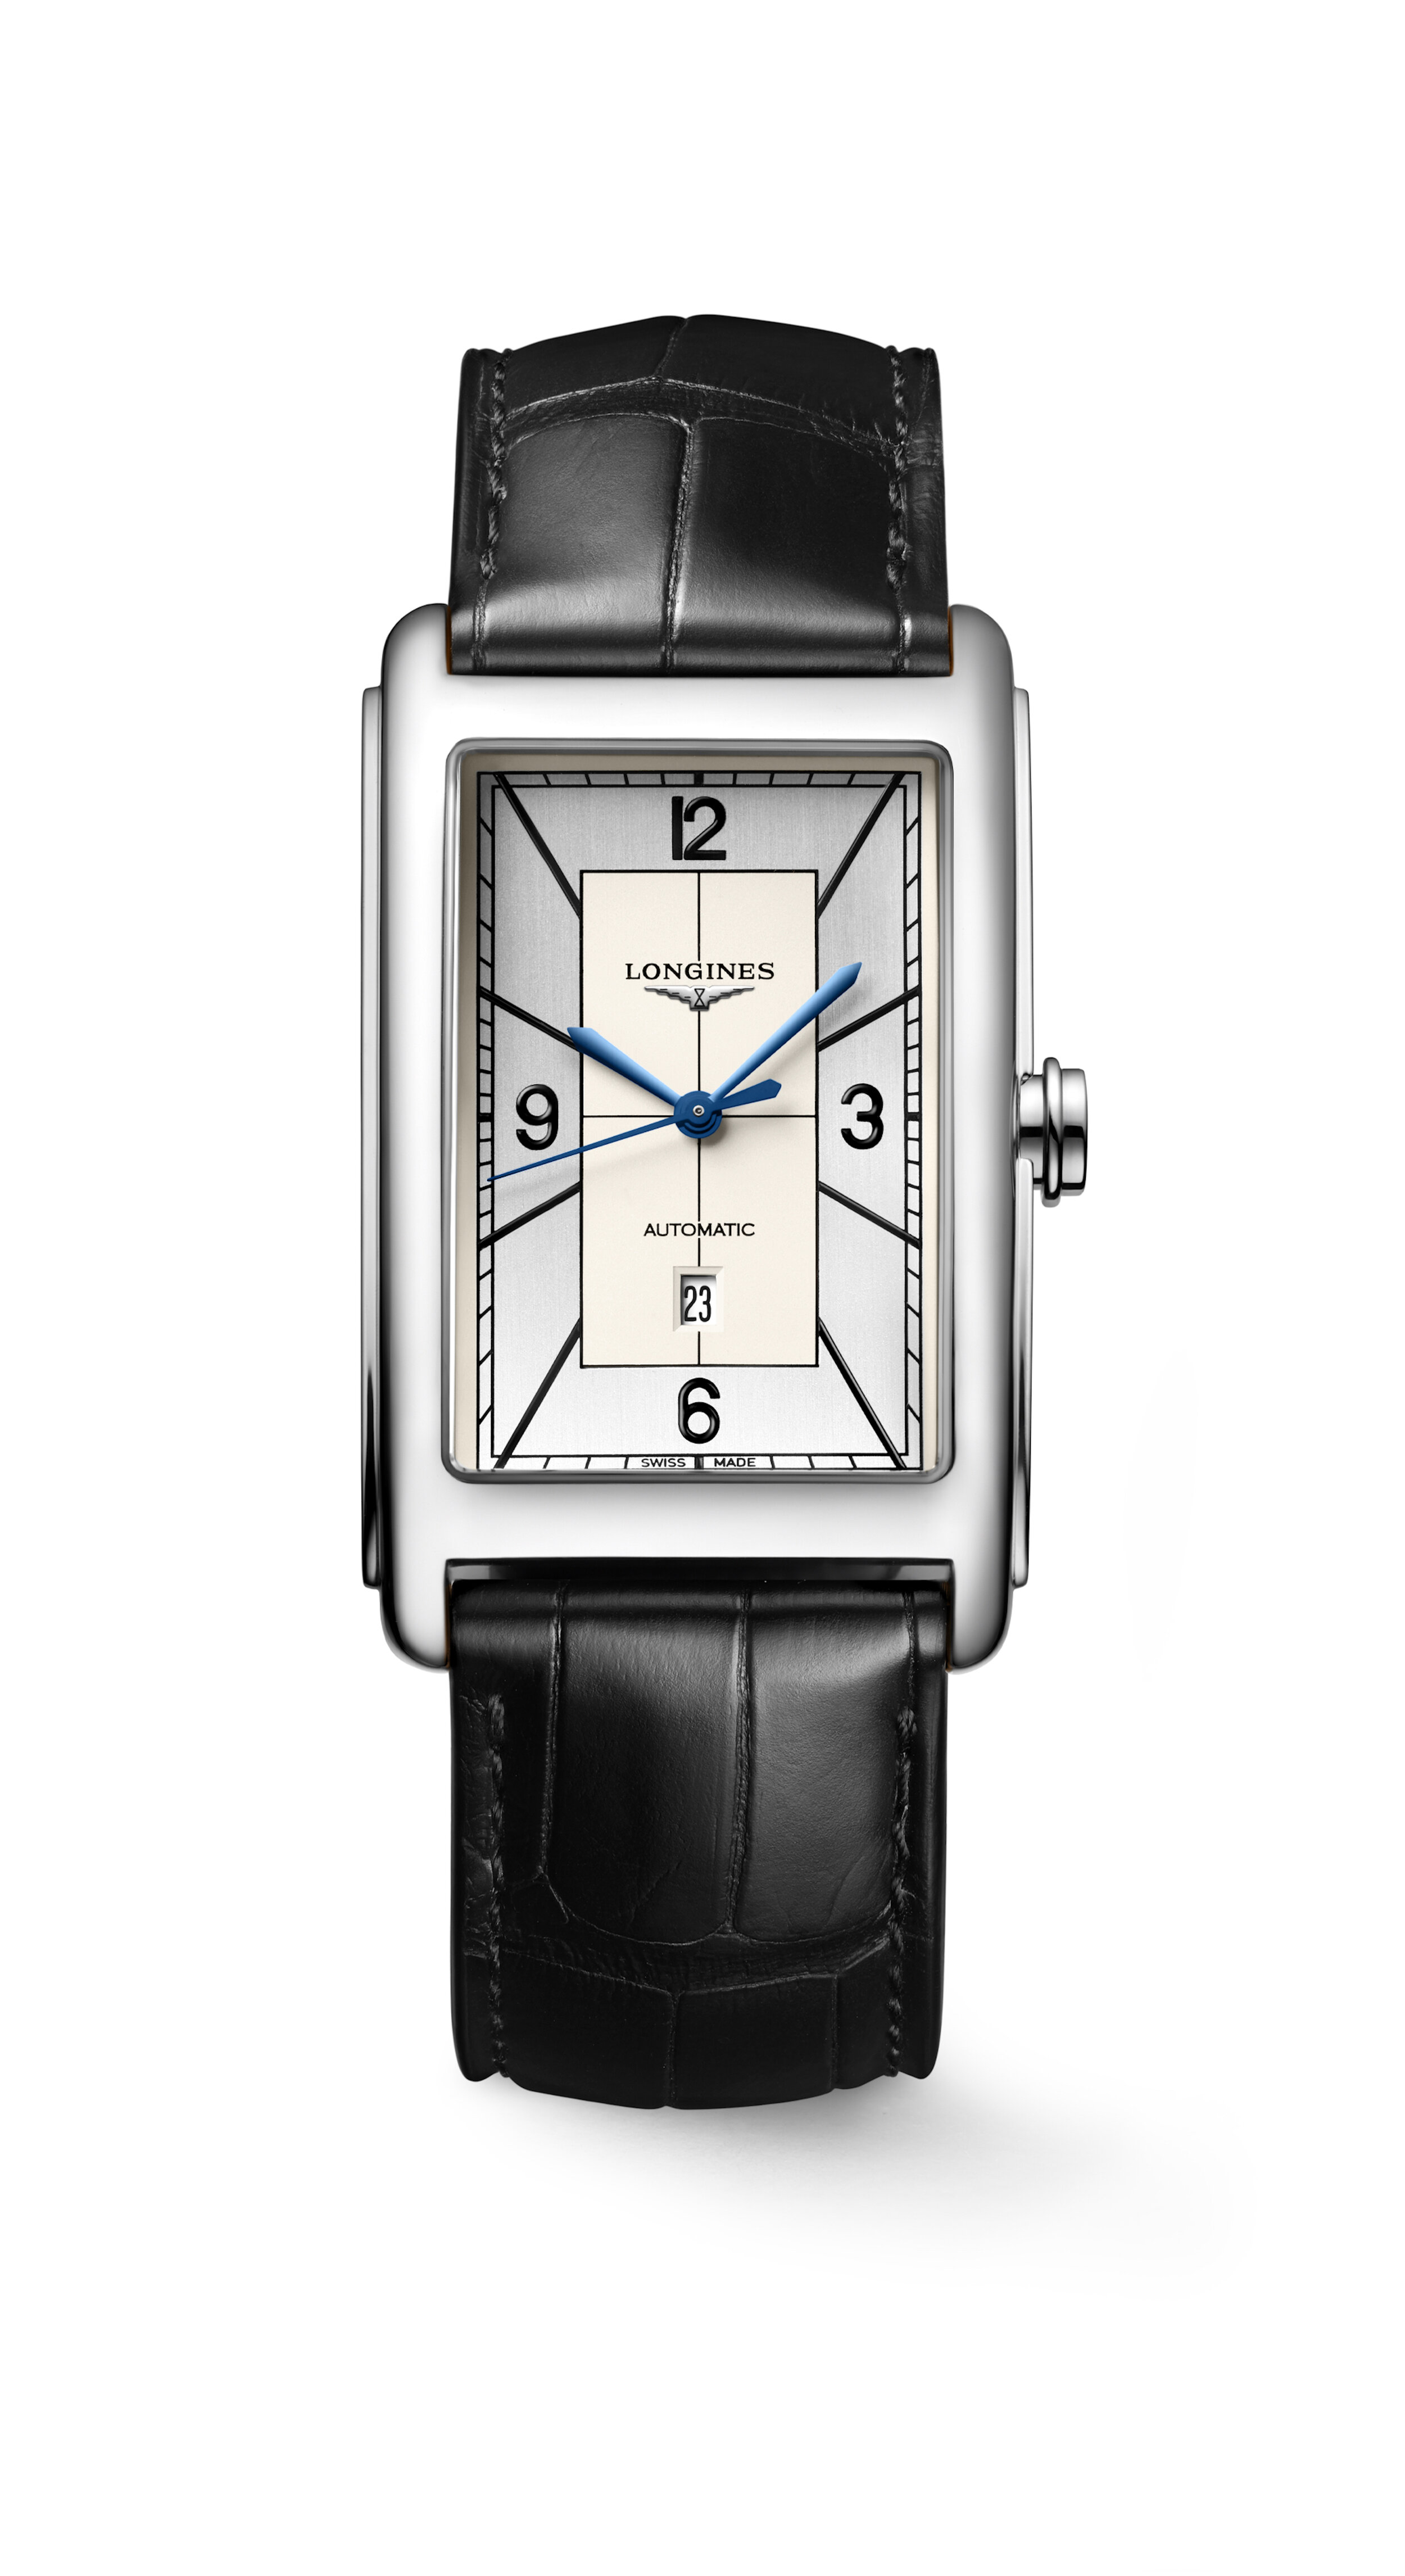 Longines : The New DolceVita Collection — Dossier Magazine